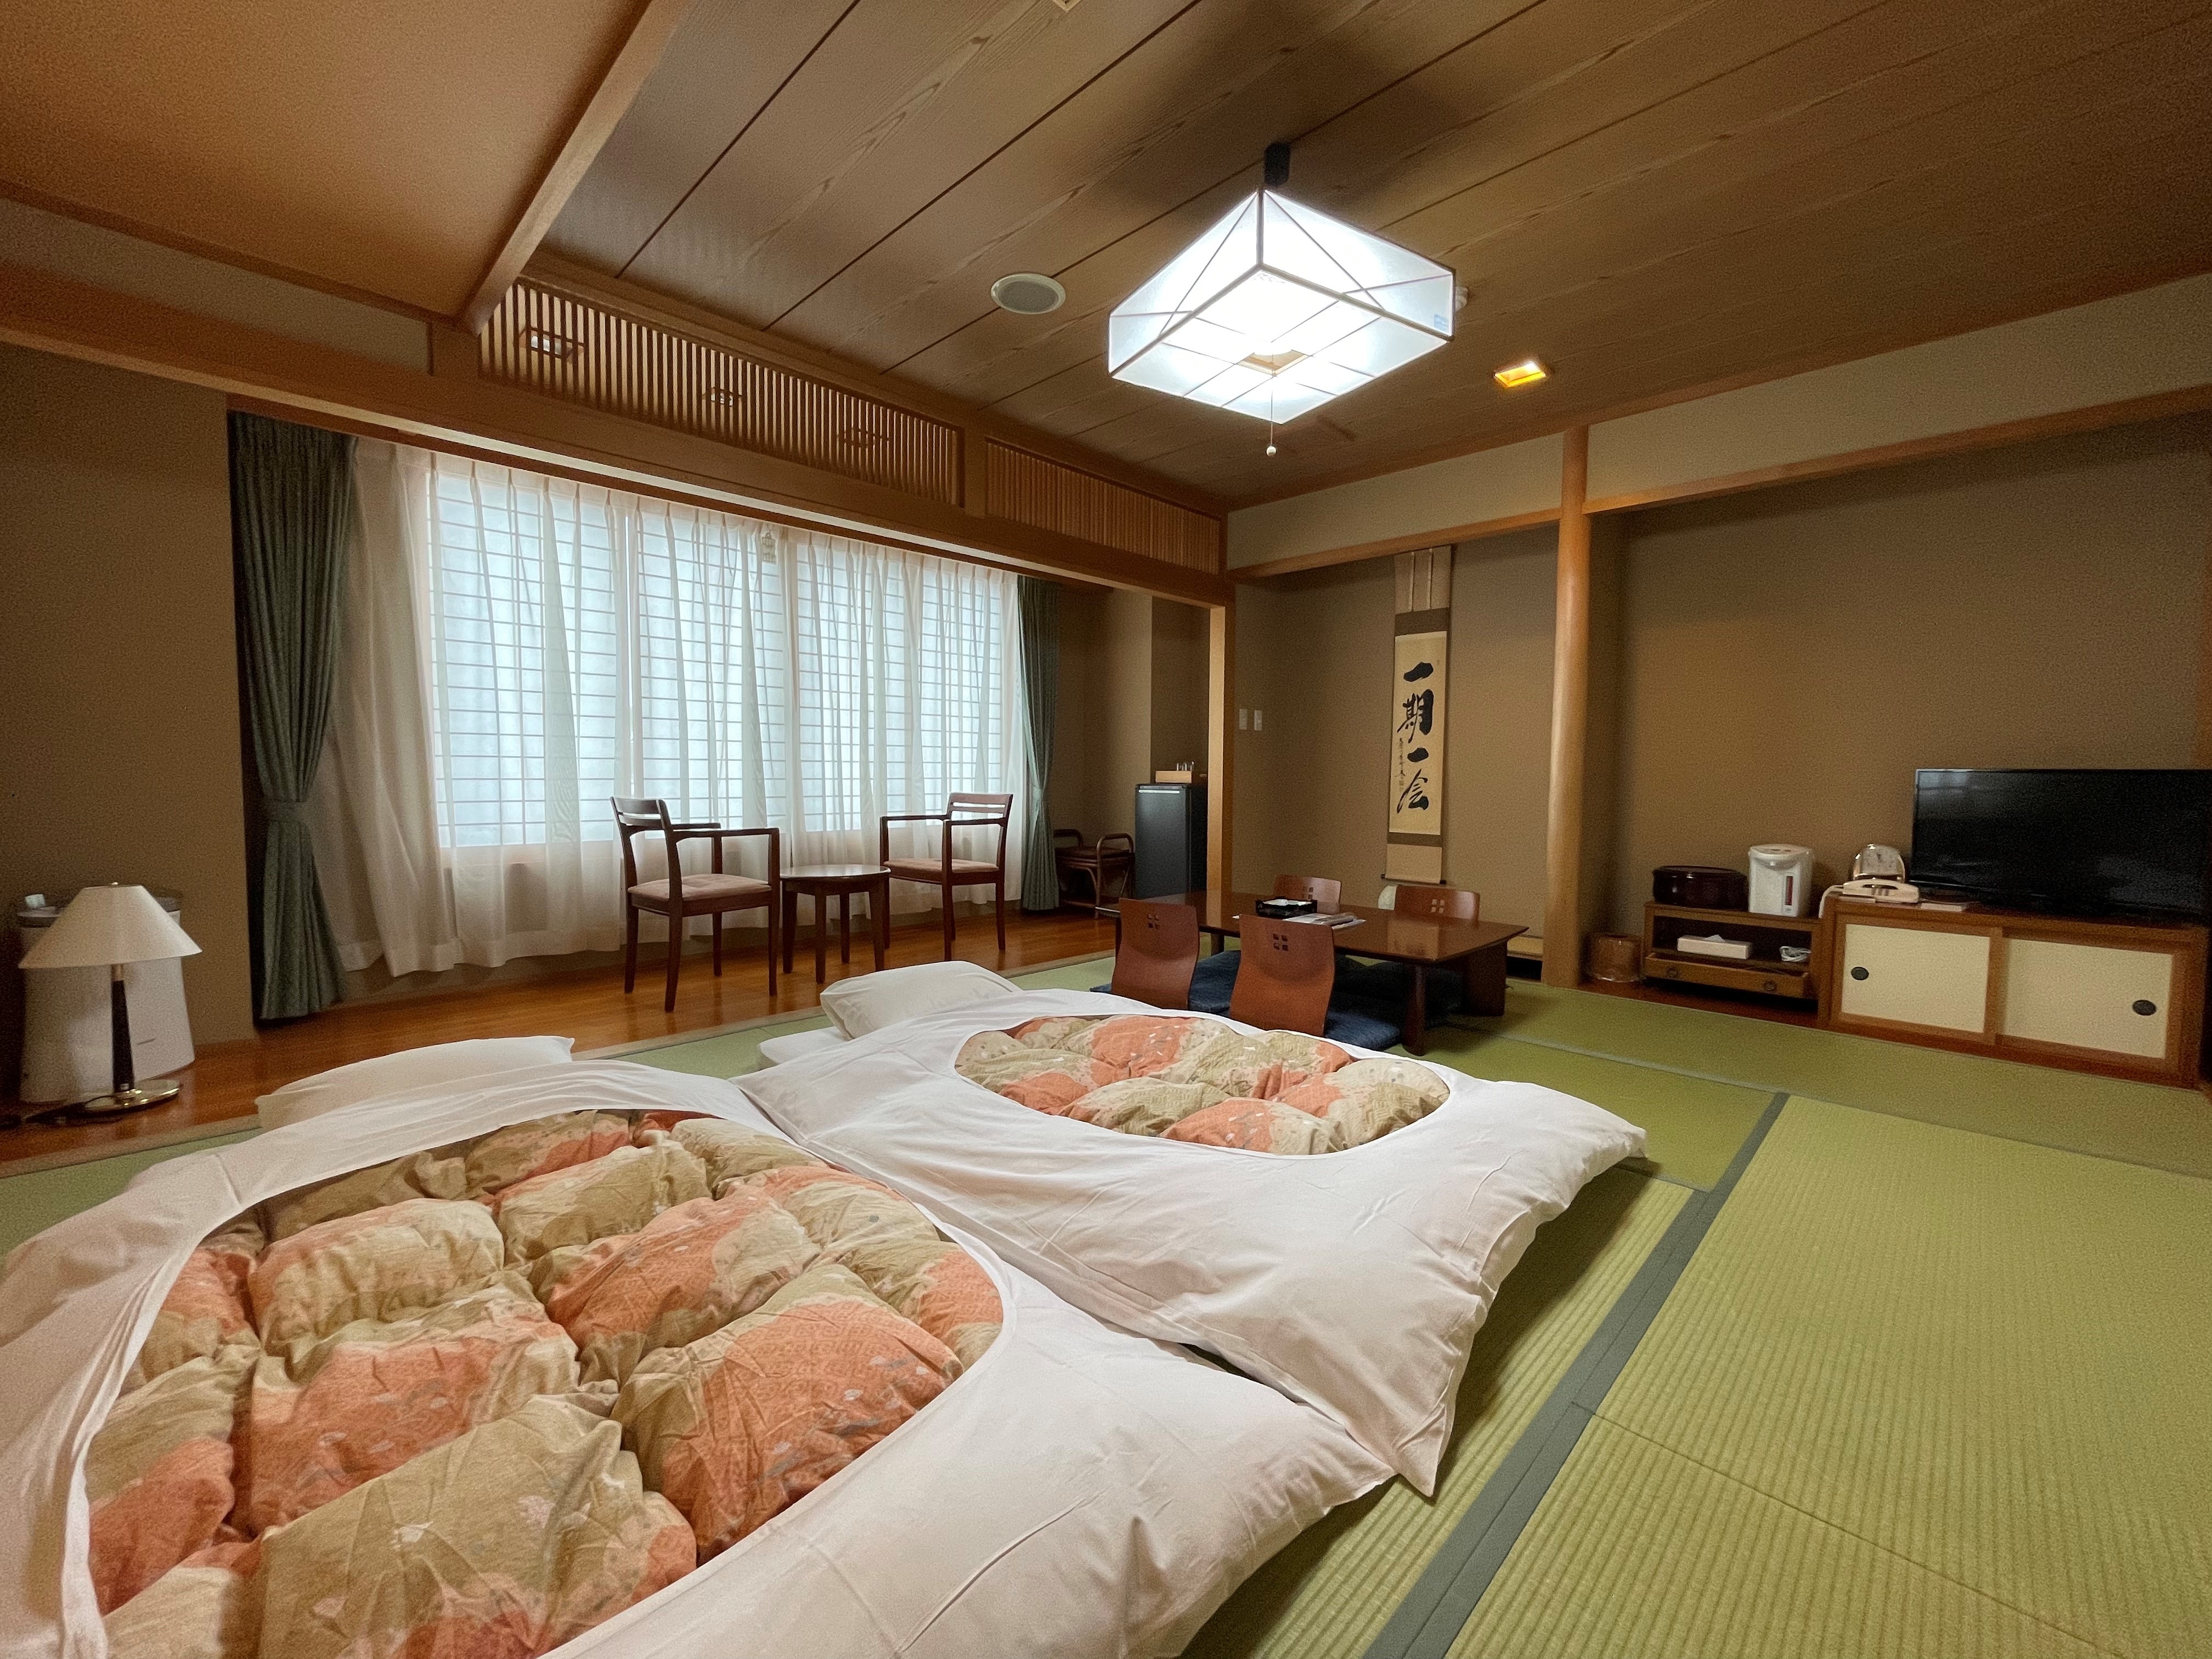 This is a Japanese-style room with only one room in the hotel. It can be used by 1 to 5 people.